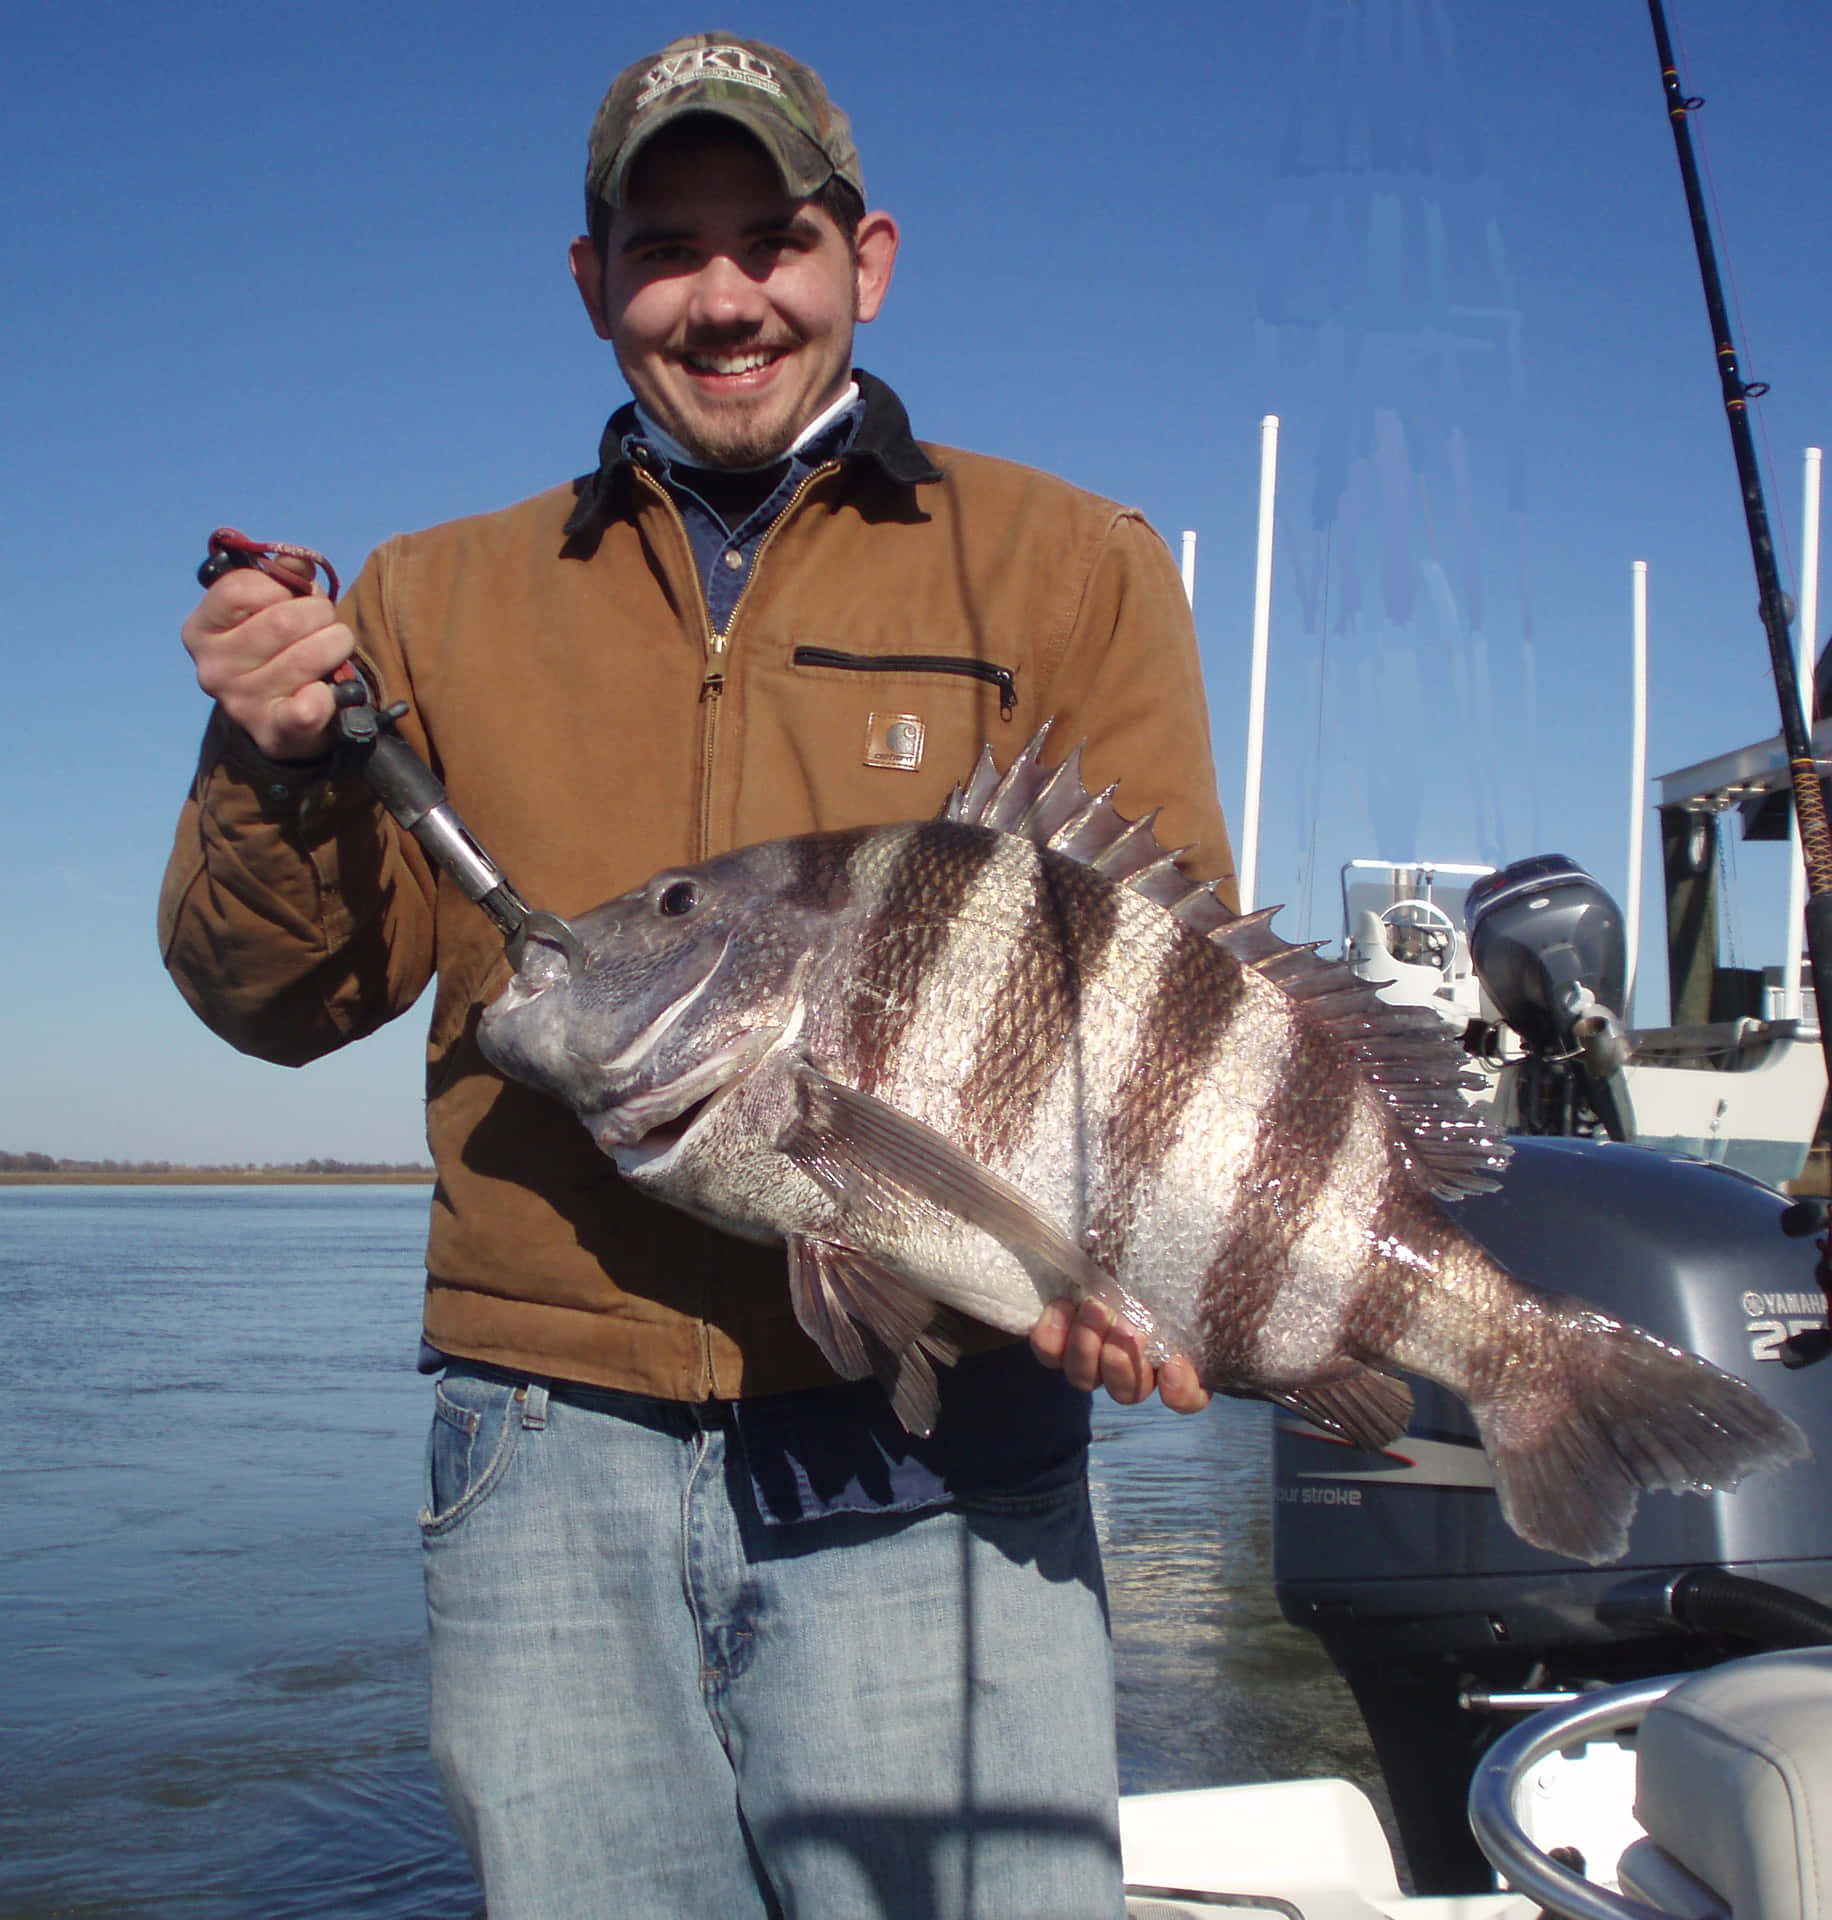 A delicious Sheepshead Fish shimmering in the sun